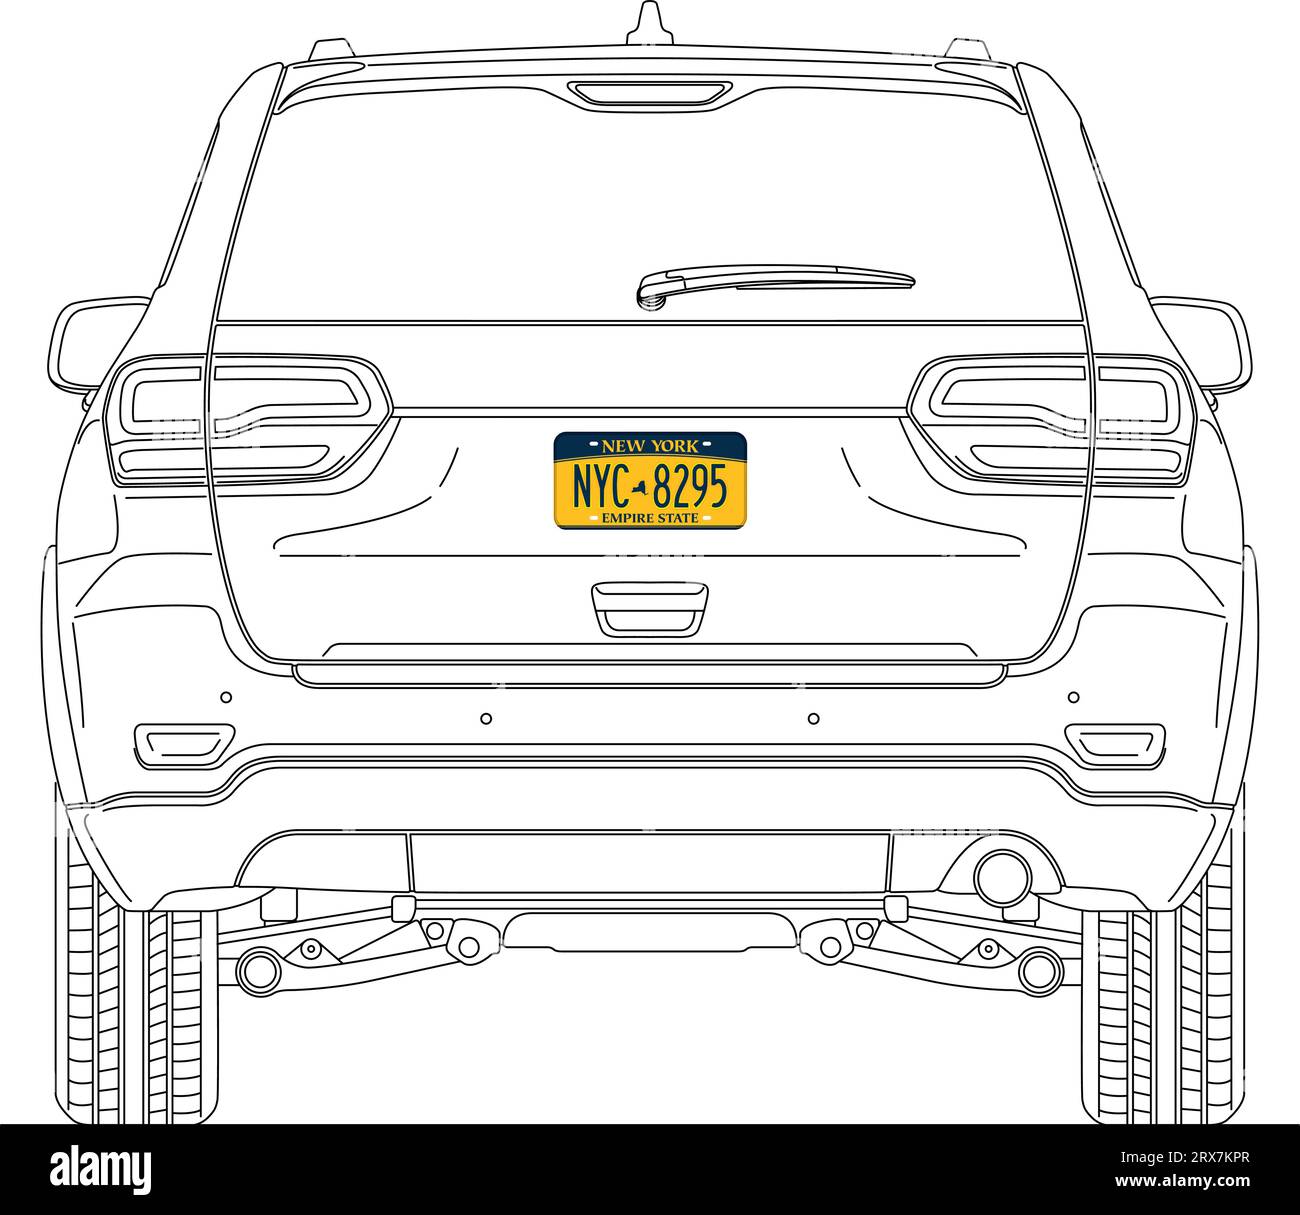 New York State car license plate in the back of a car, USA, United States, vector illustration Stock Vector